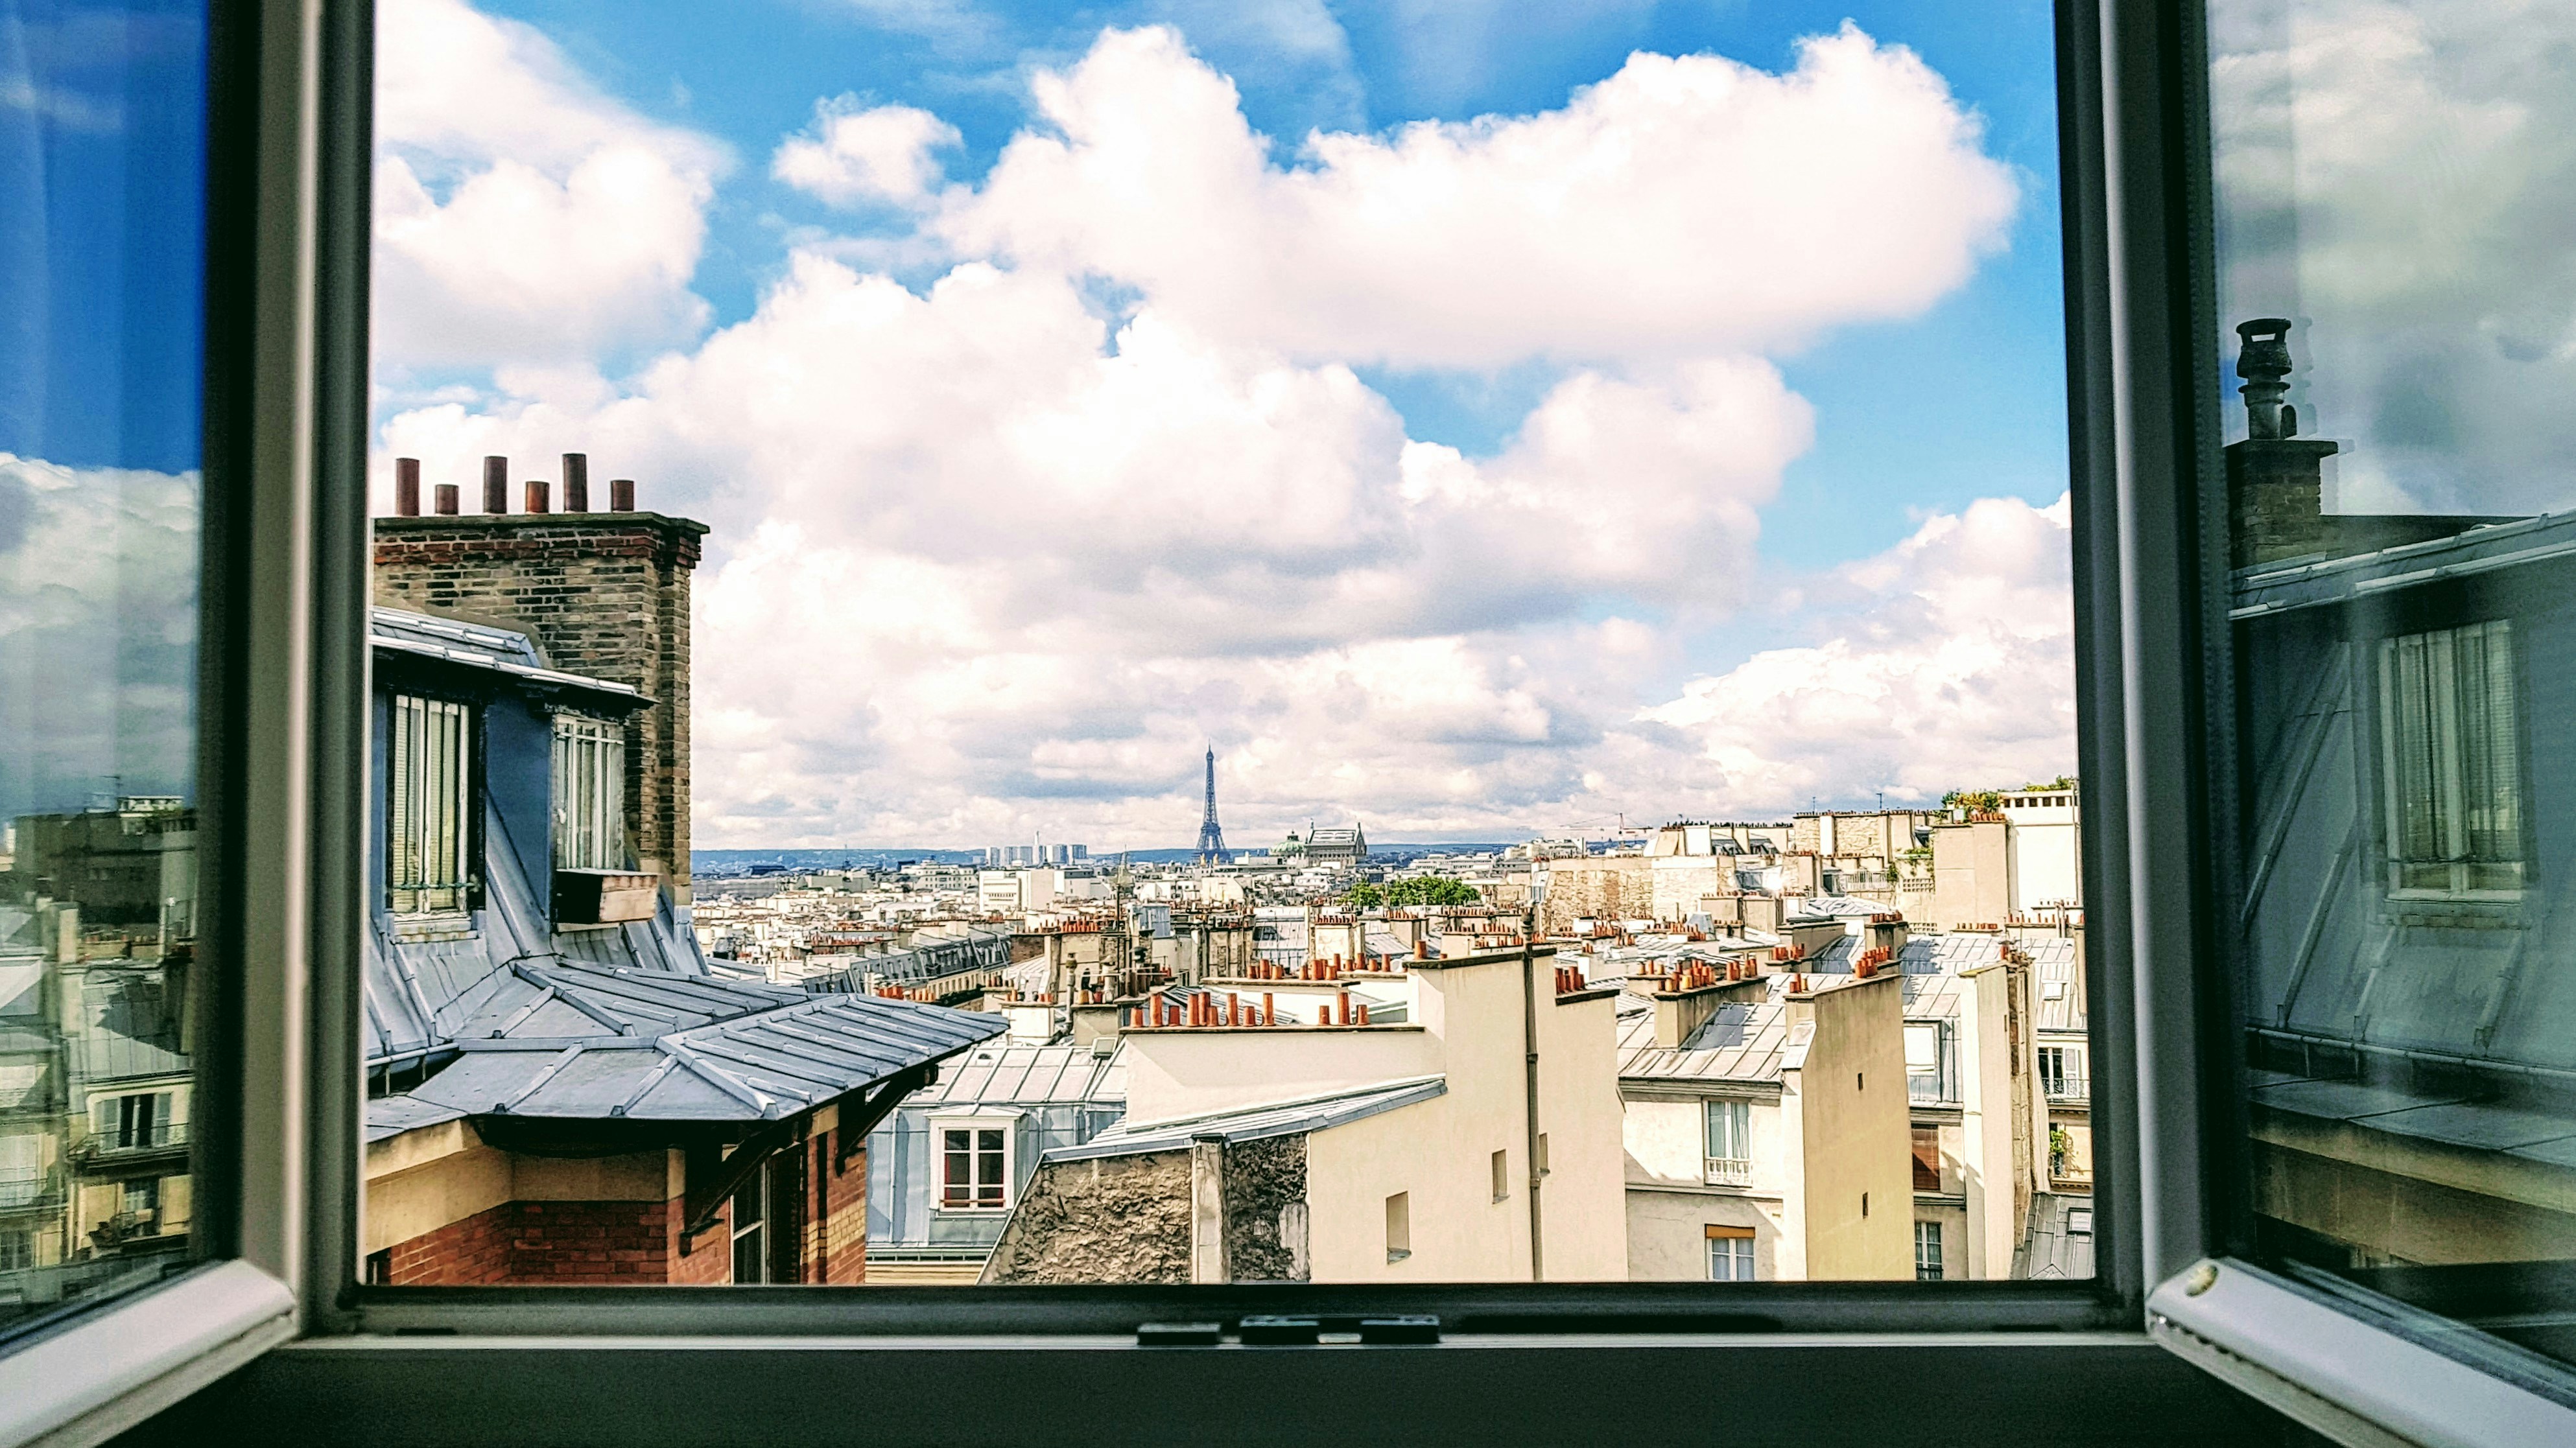 A picture taken from the window of my little apartment on Rue la Fayette in downtown Paris. My wife and I had just arrived and I snapped a picture before we passed out on the bed underneath the window.